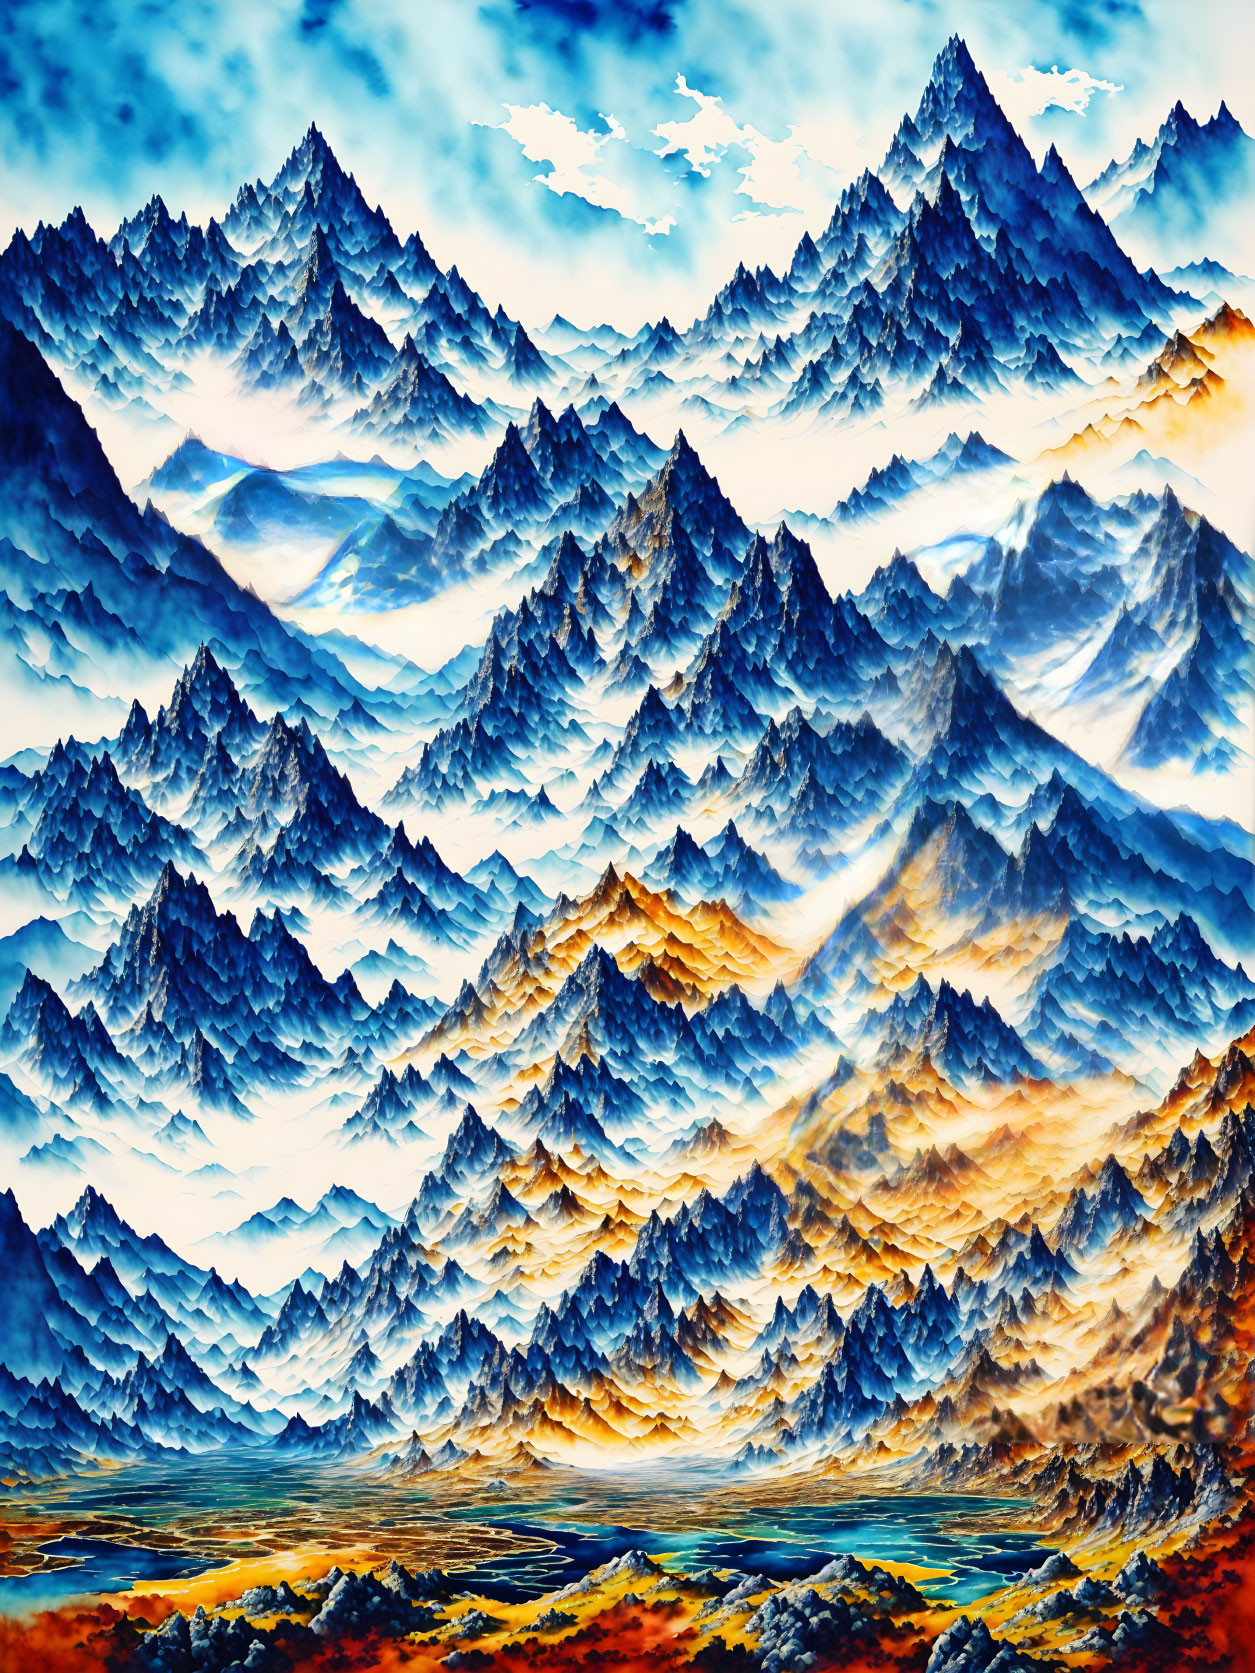 The blue challenge of the mountains